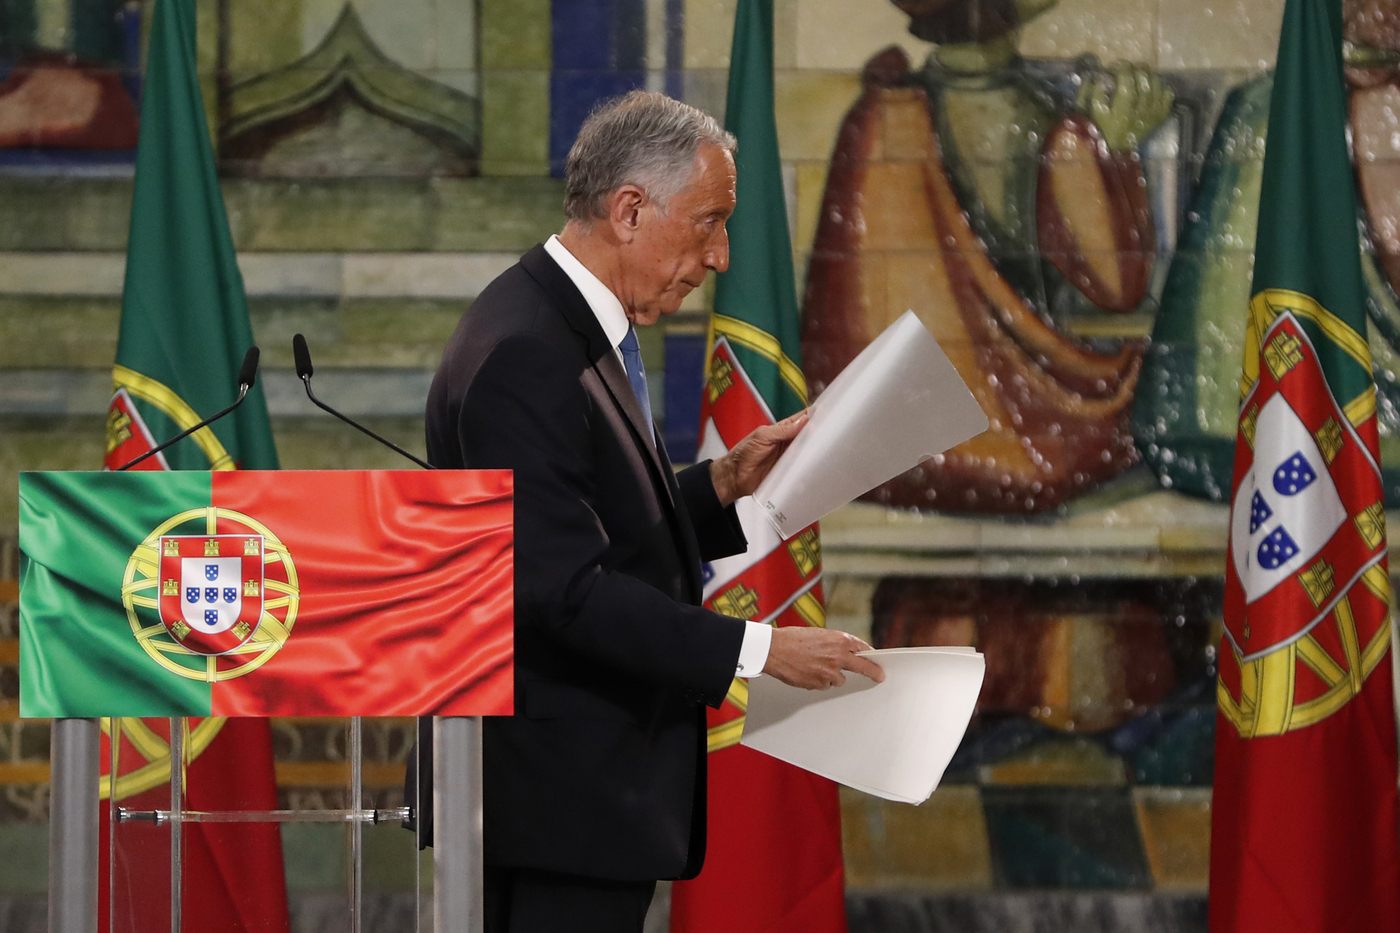 Incumbent Marcelo Rebelo de Sousa leaves the lectern after delivering a speech following the results of Portugal's presidential election, in Lisbon, Monday, Jan. 25, 2021. Rebelo de Sousa was reelected for a second five-year term. (AP Photo/Armando Franca)